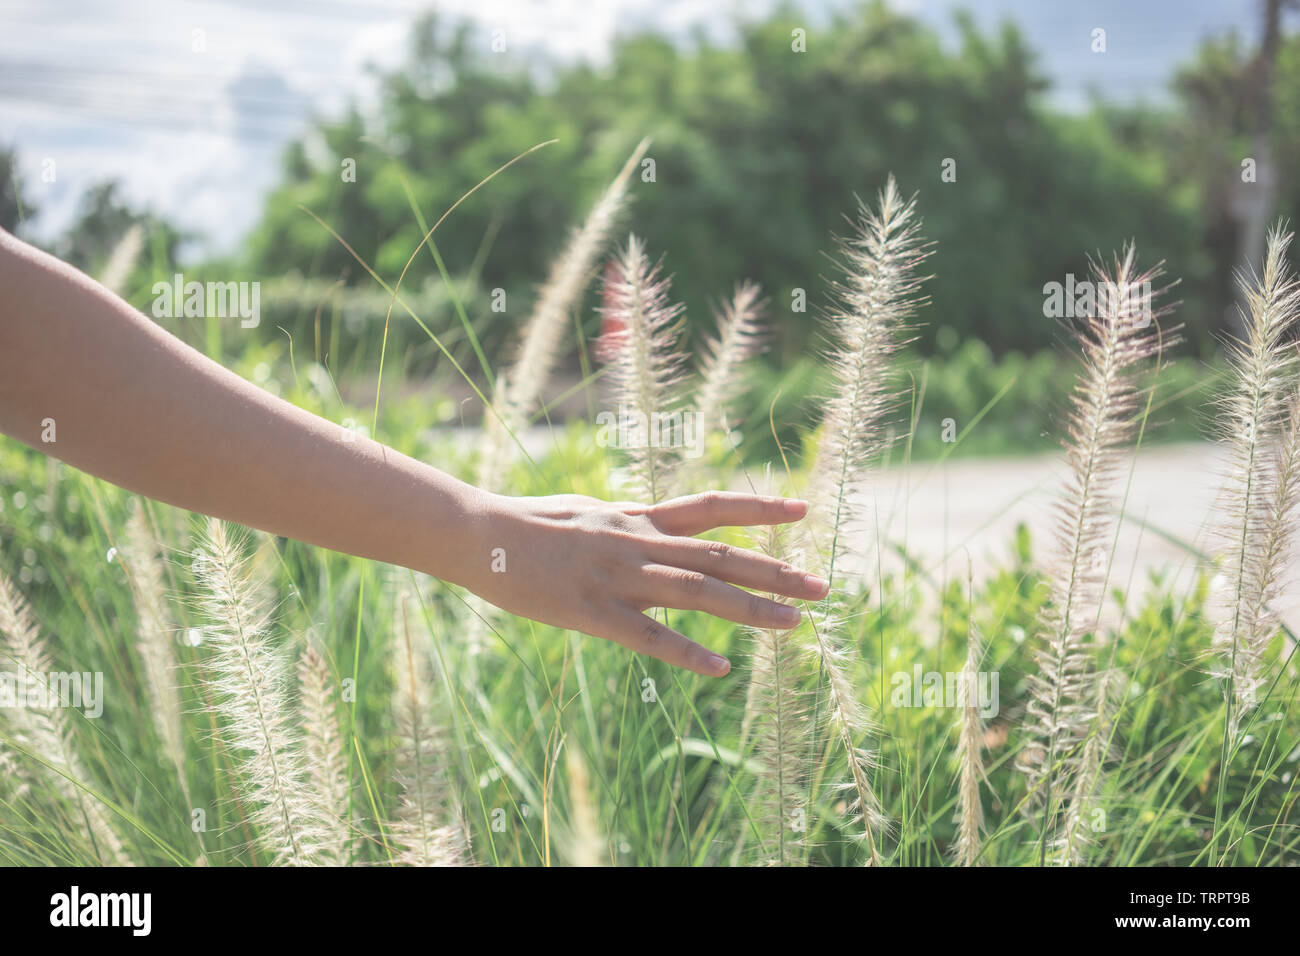 Hand touching grass stock photo. Image of stem, growing - 39121604